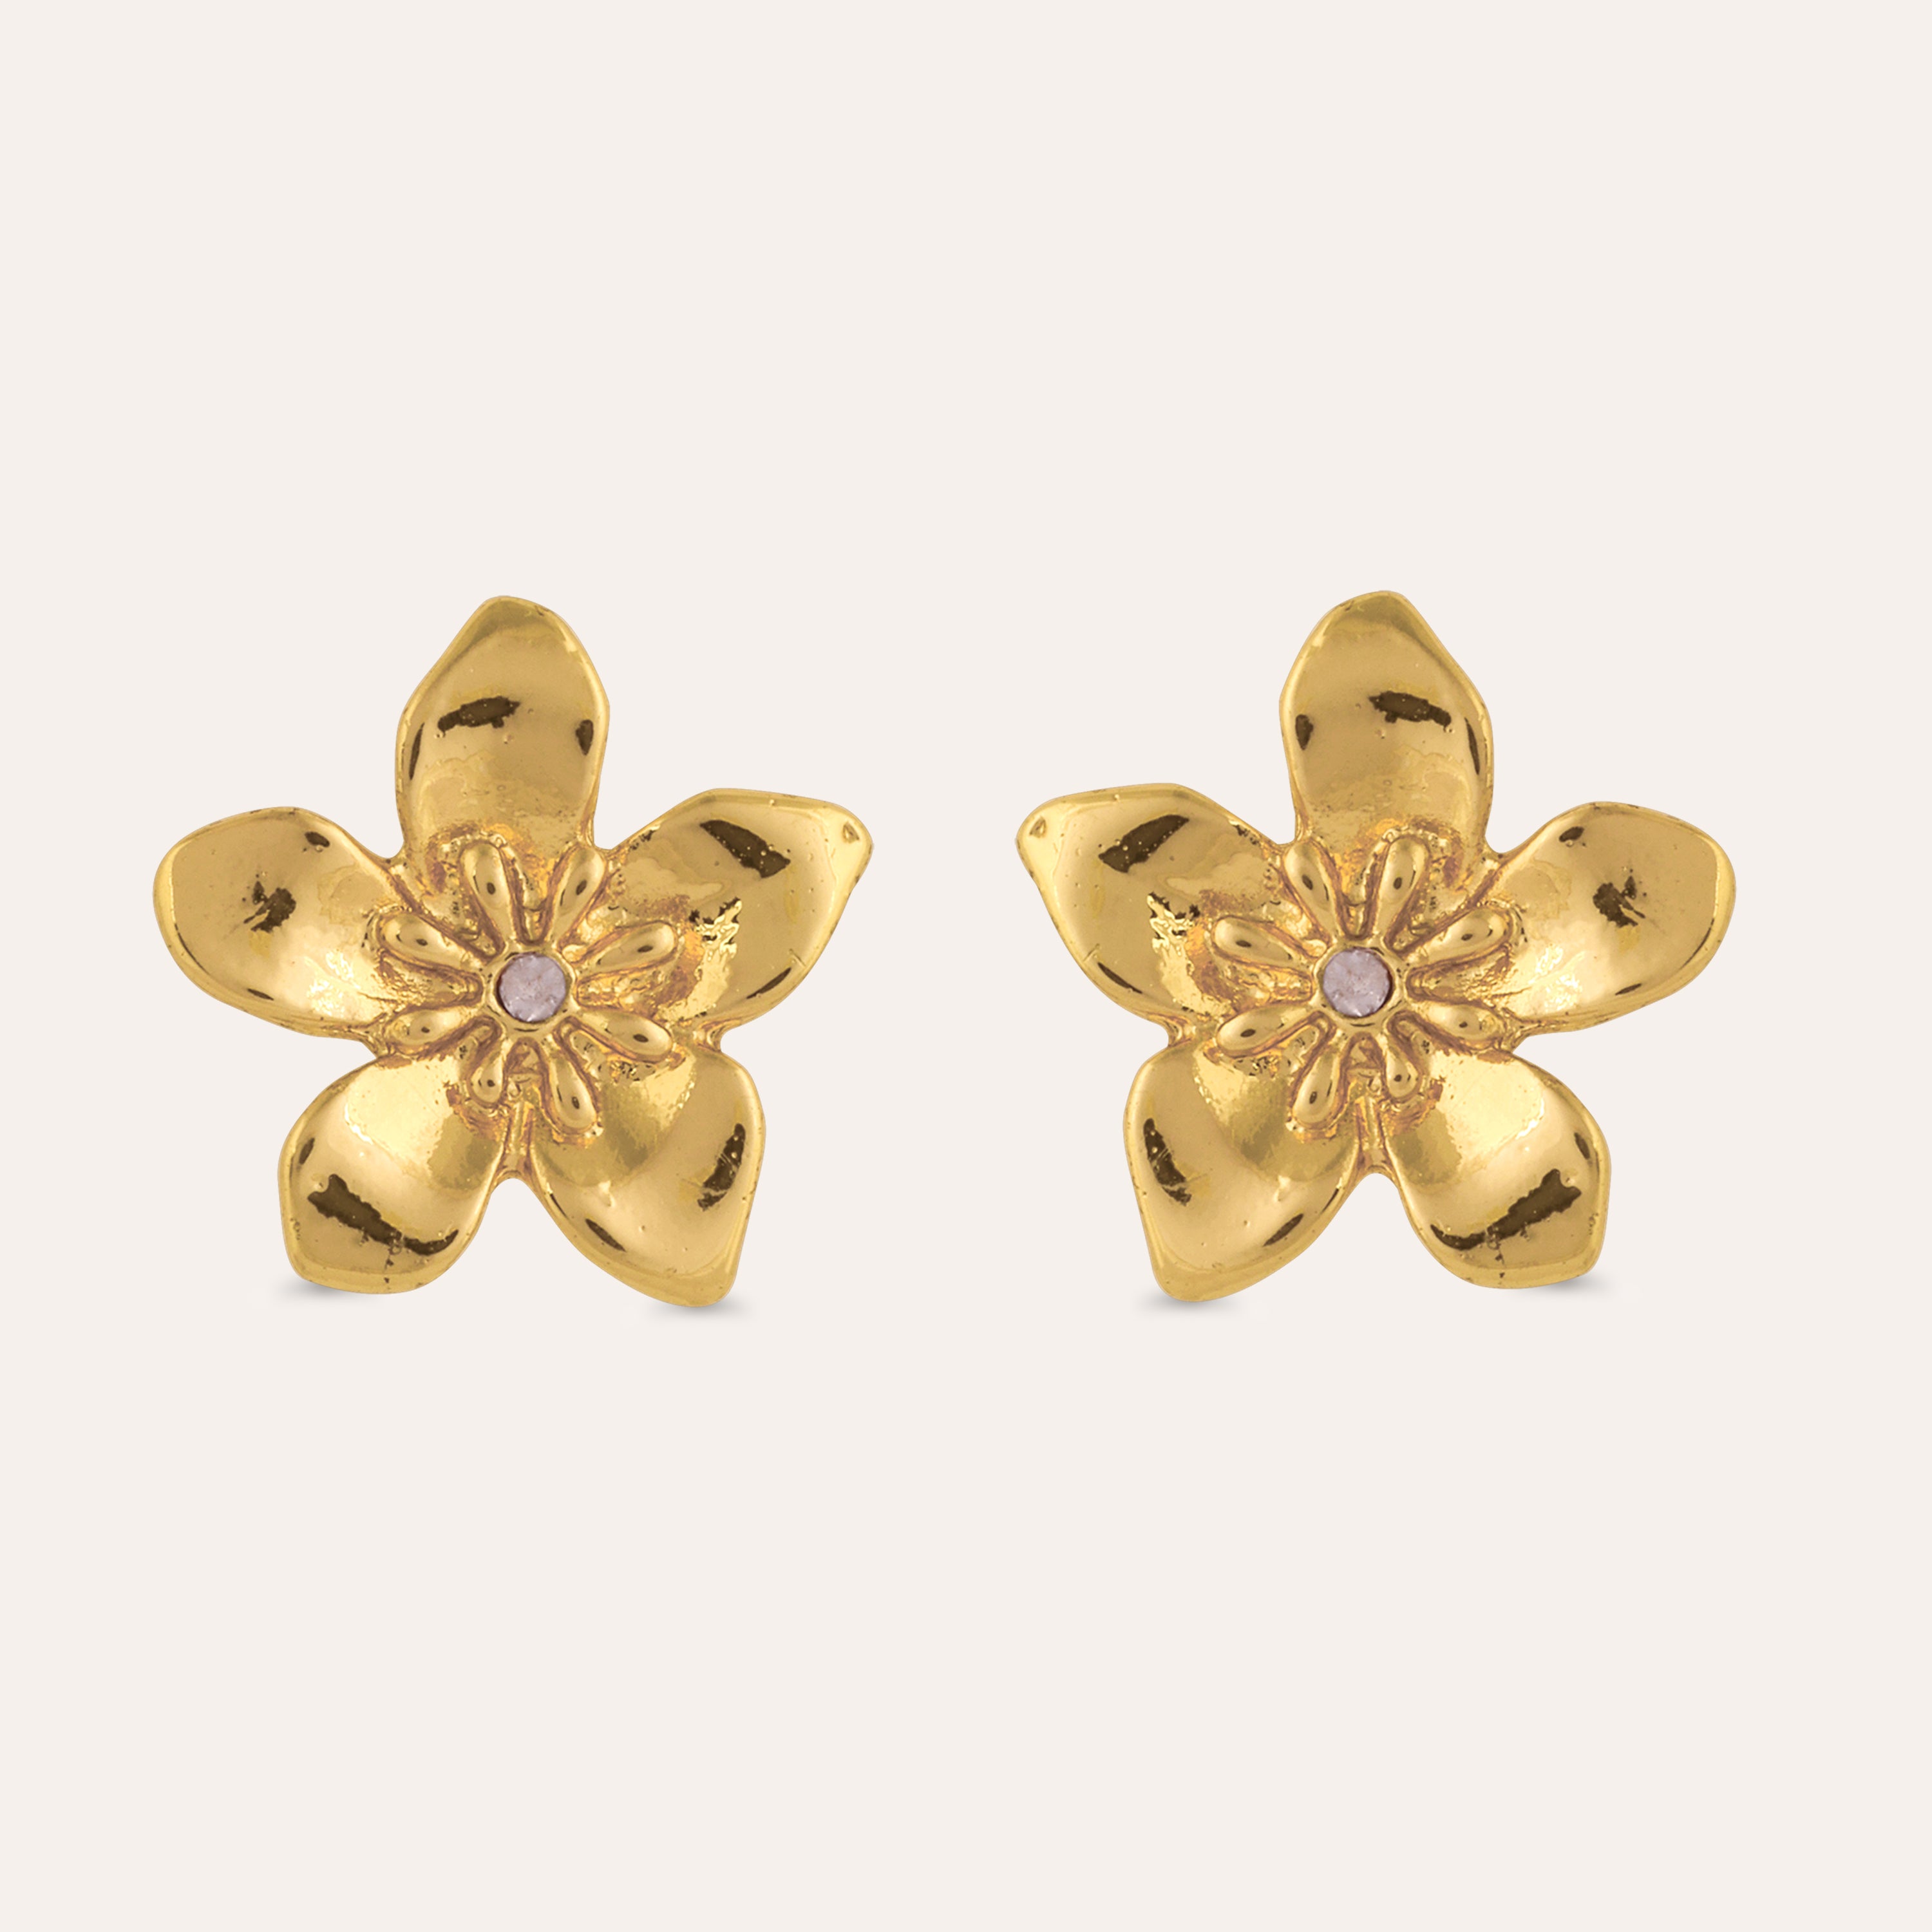 TFC Heartfelt Gold Plated Stud Earrings- Discover daily wear gold earrings including stud earrings, hoop earrings, and pearl earrings, perfect as earrings for women and earrings for girls.Find the cheapest fashion jewellery which is anti-tarnis​h only at The Fun company.